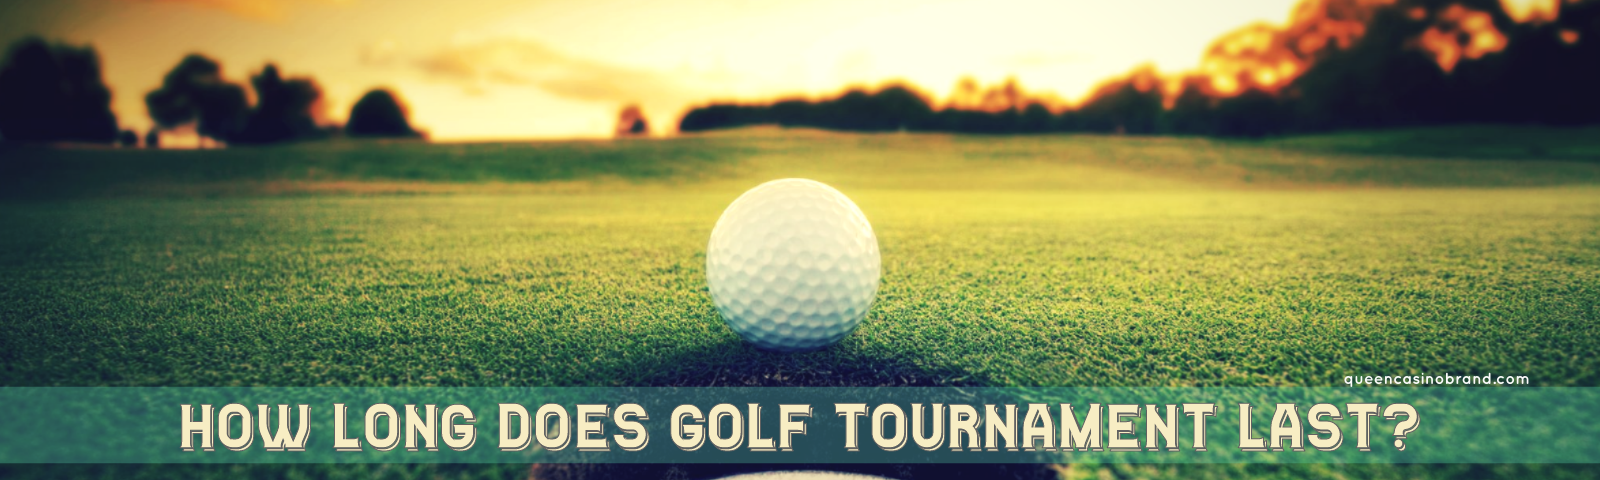 How Long Does Golf Tournament Last? | Queen Casino Brand